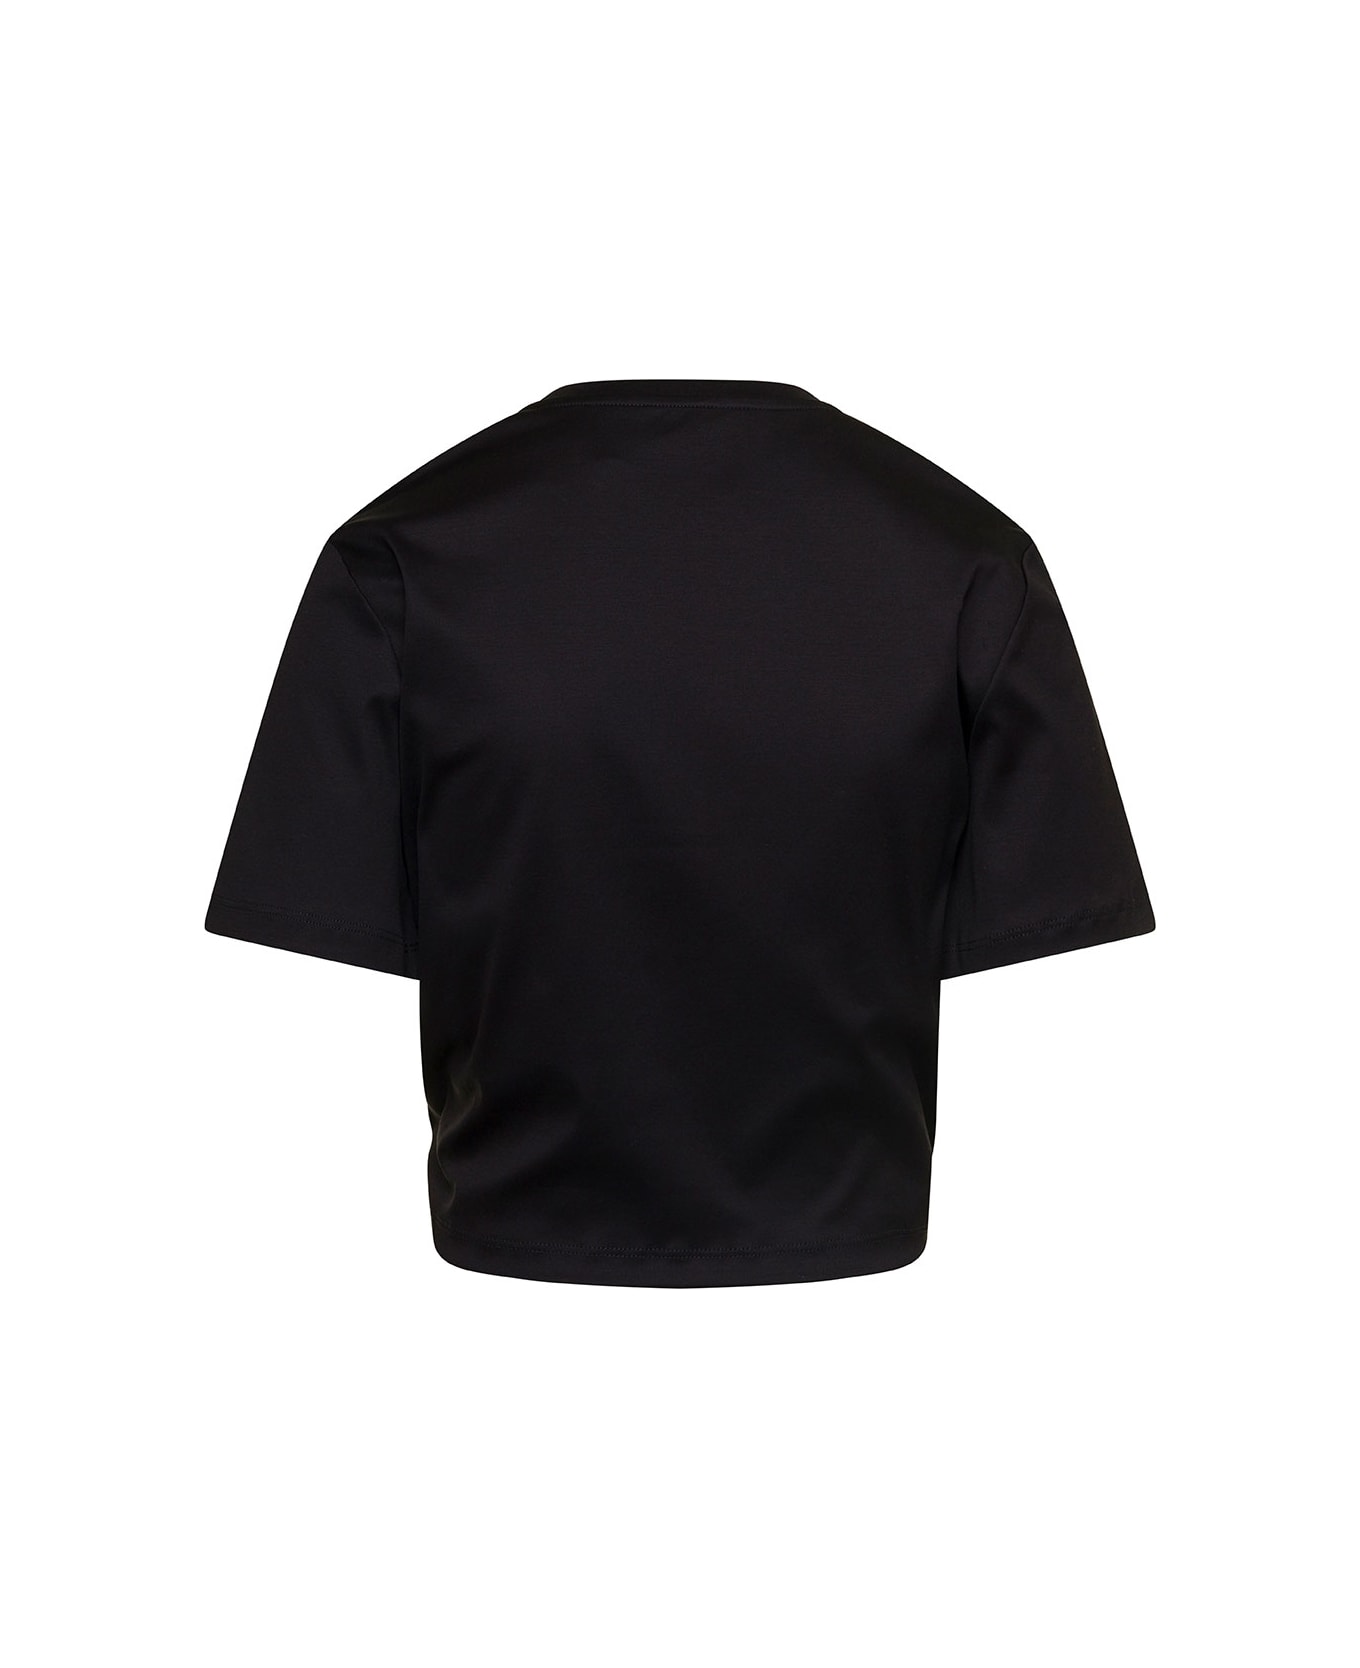 Versace Black Cropped T-shirt With Gathered Hemline And Wearty Pin In Cotton Woman - Black